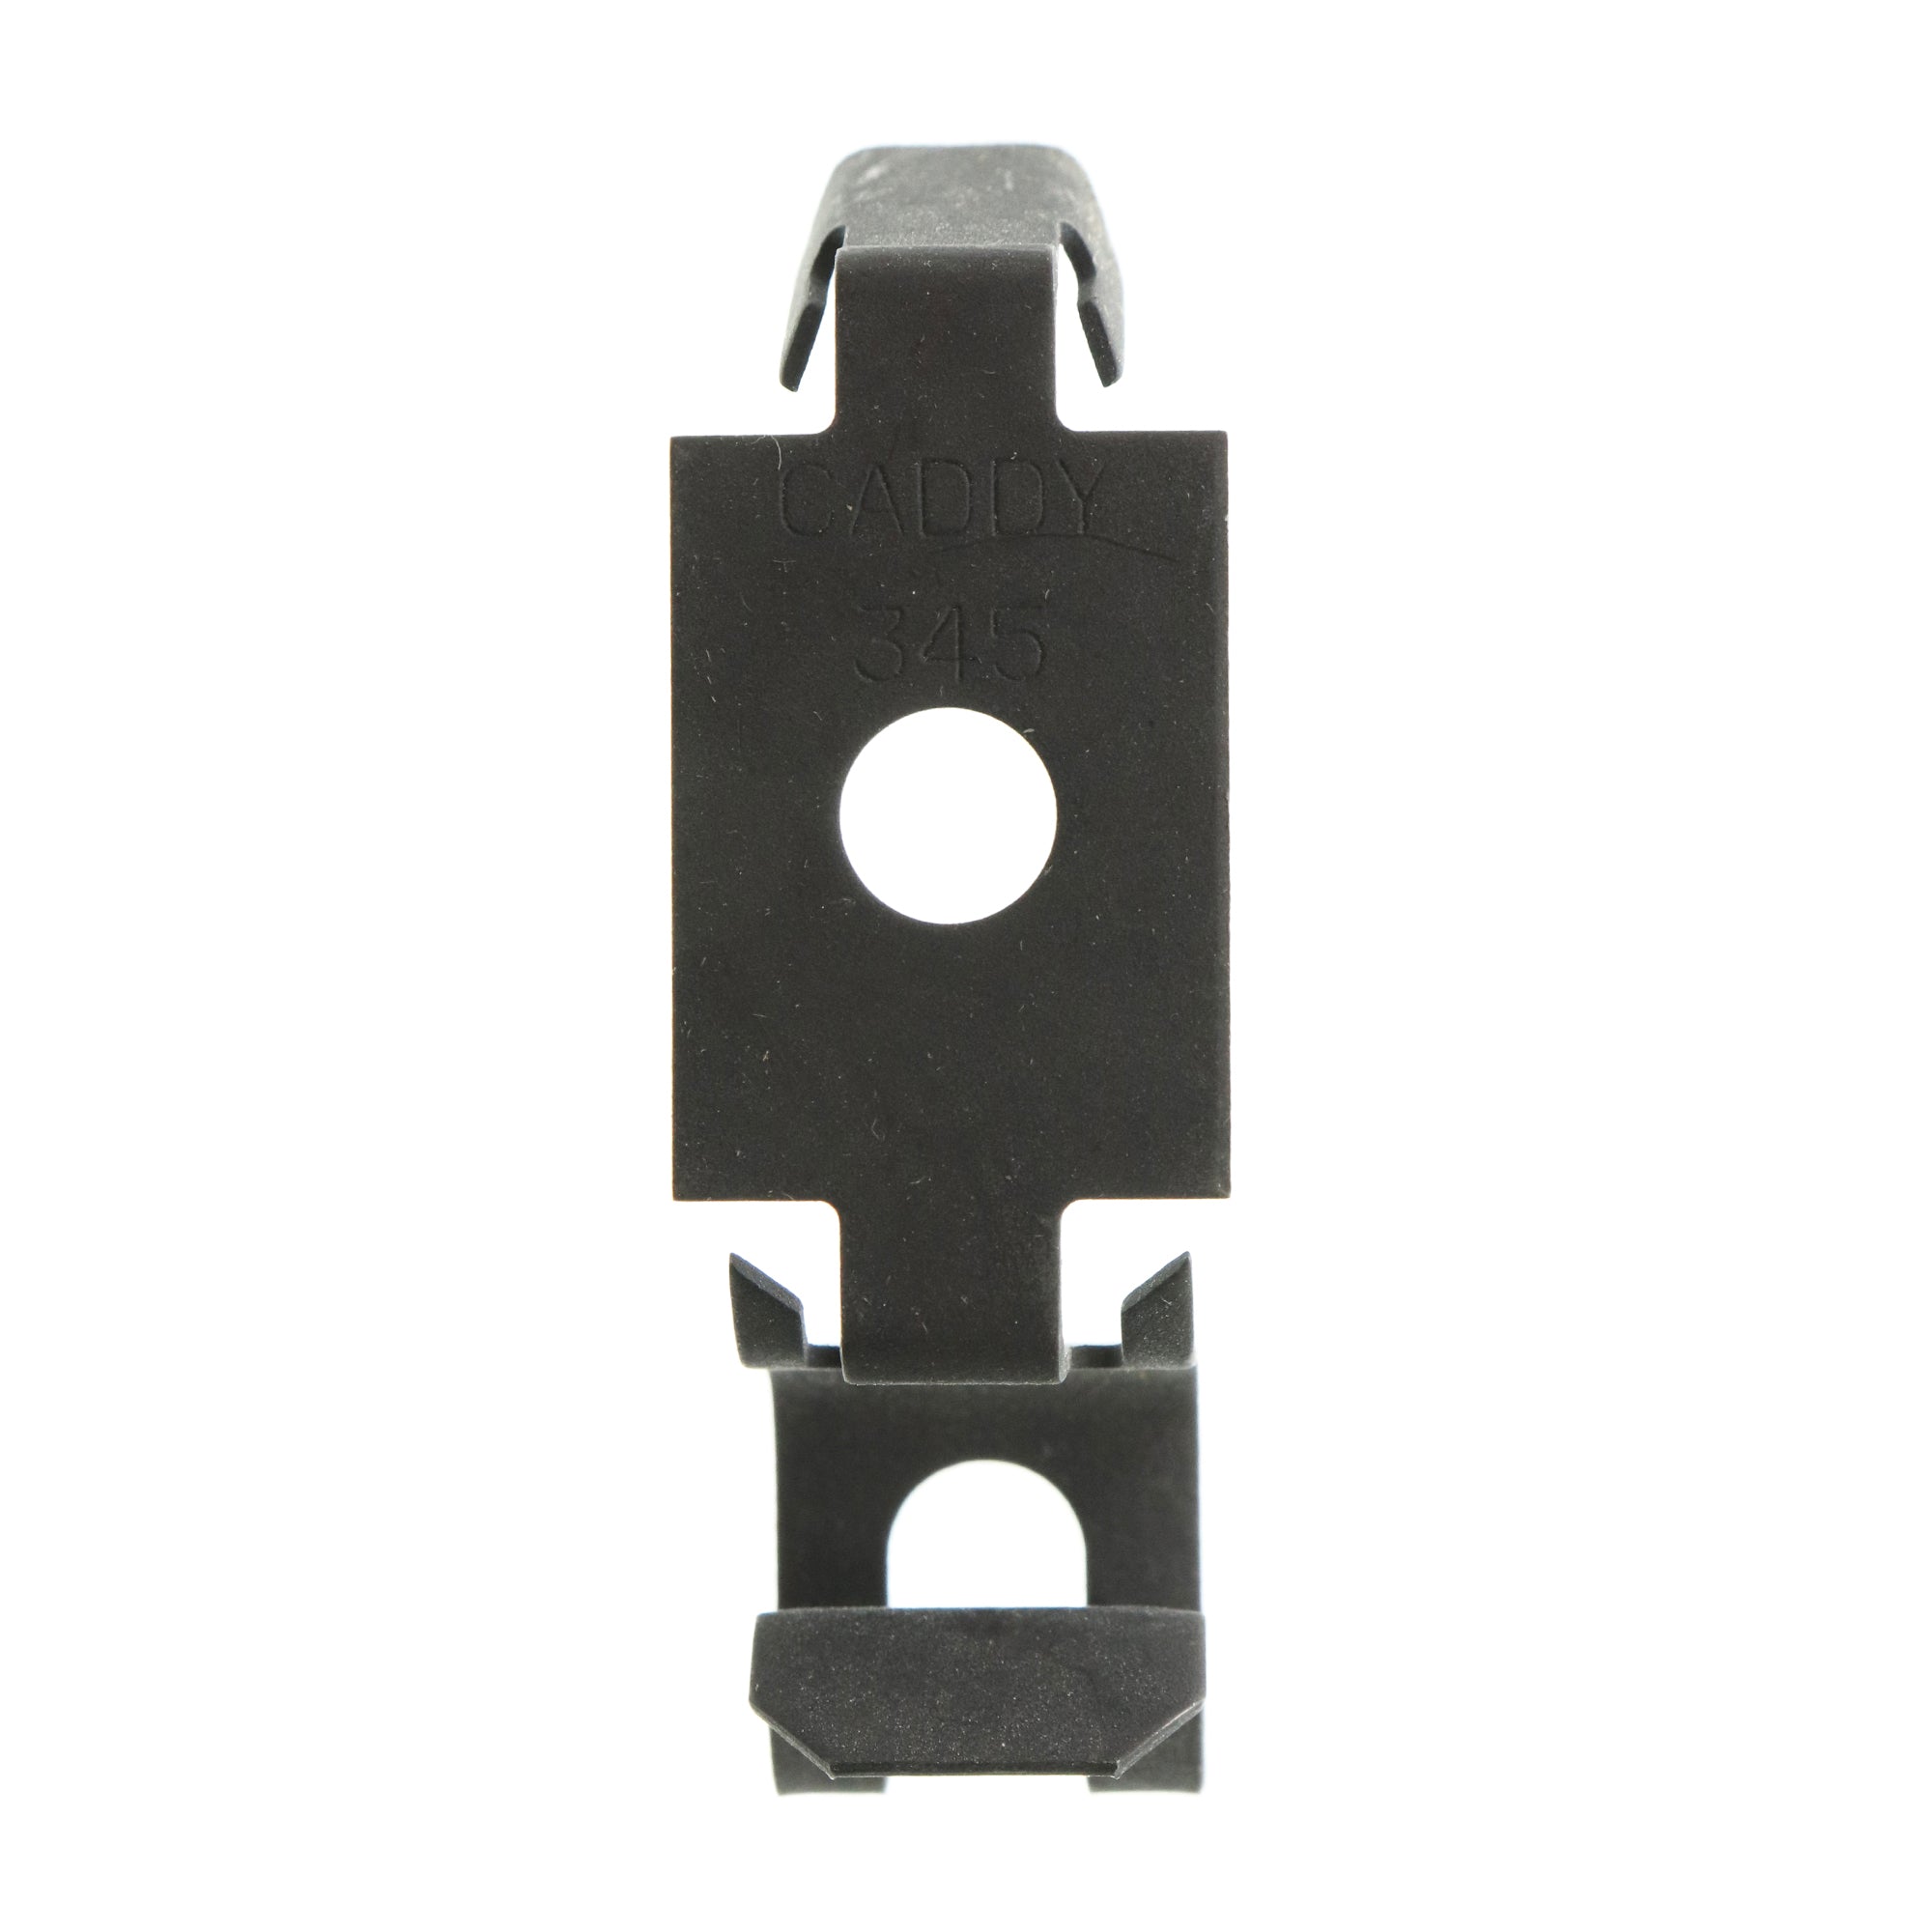 Erico Caddy Cadwal, ERICO CADDY 345 MC, AC, OR BX TO METAL OR WOOD STUD CABLE CLIP, (100-PACK)